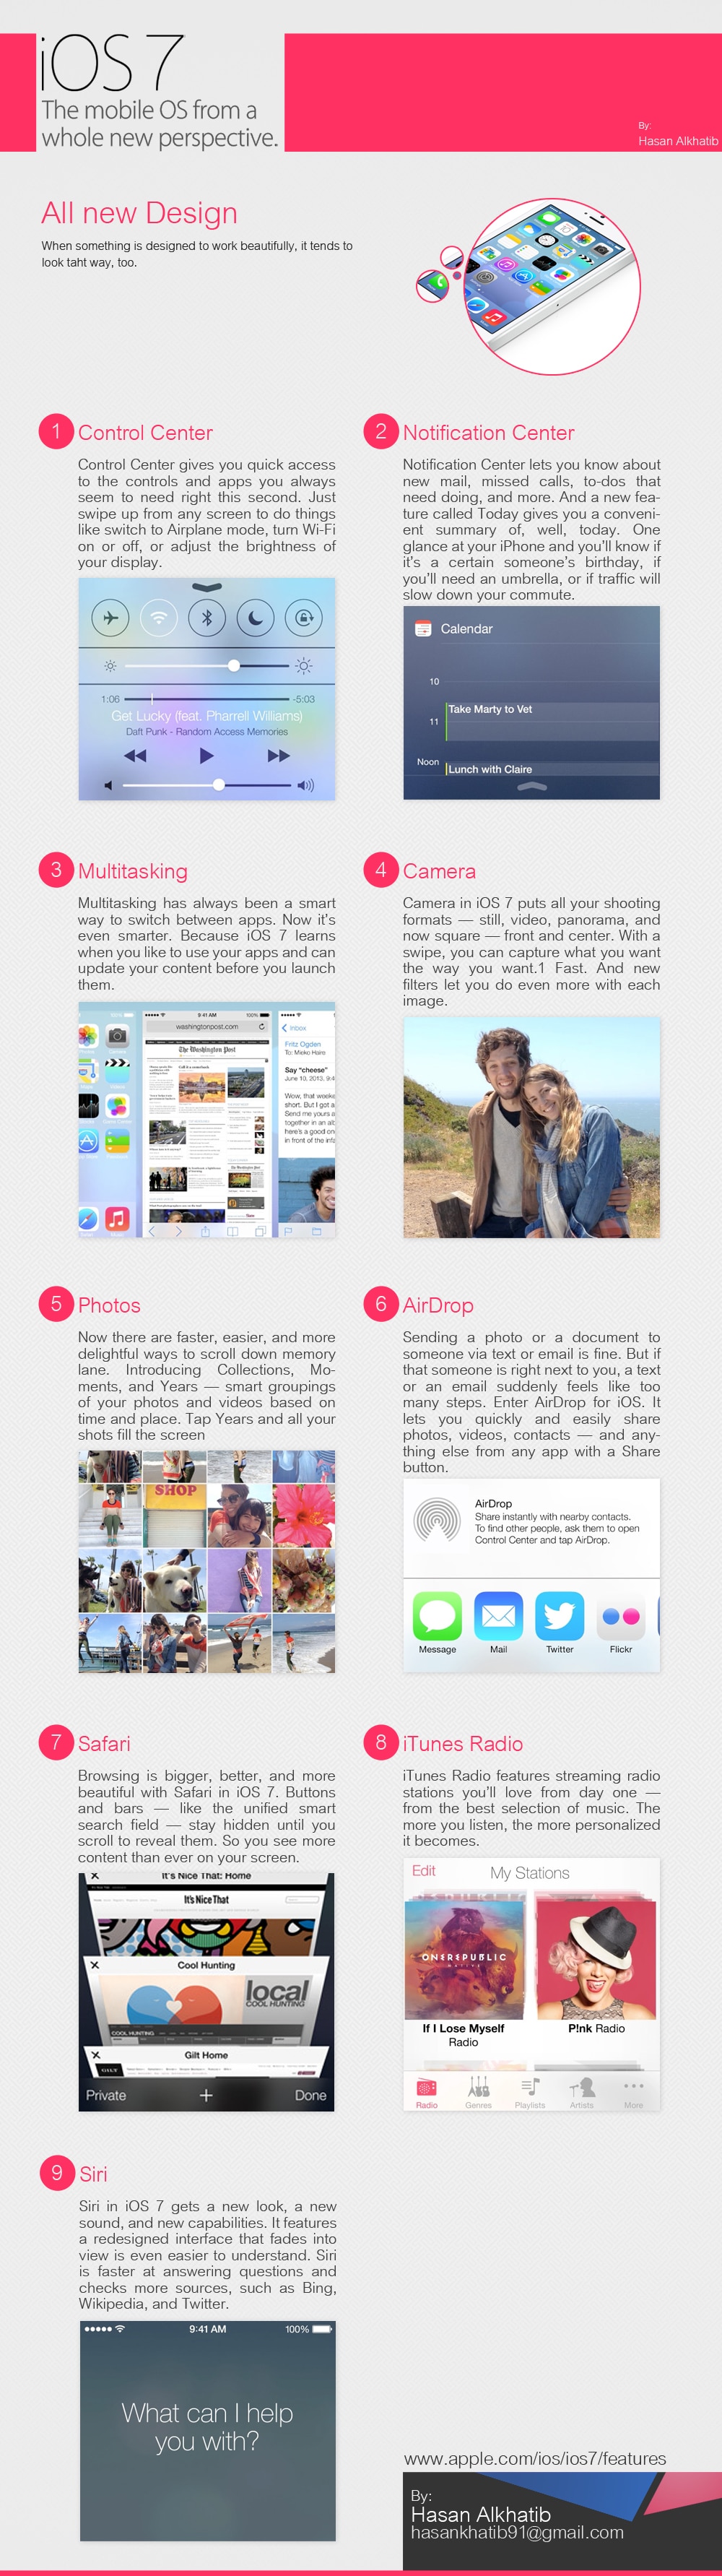 ios-7-feature-overview-infographic